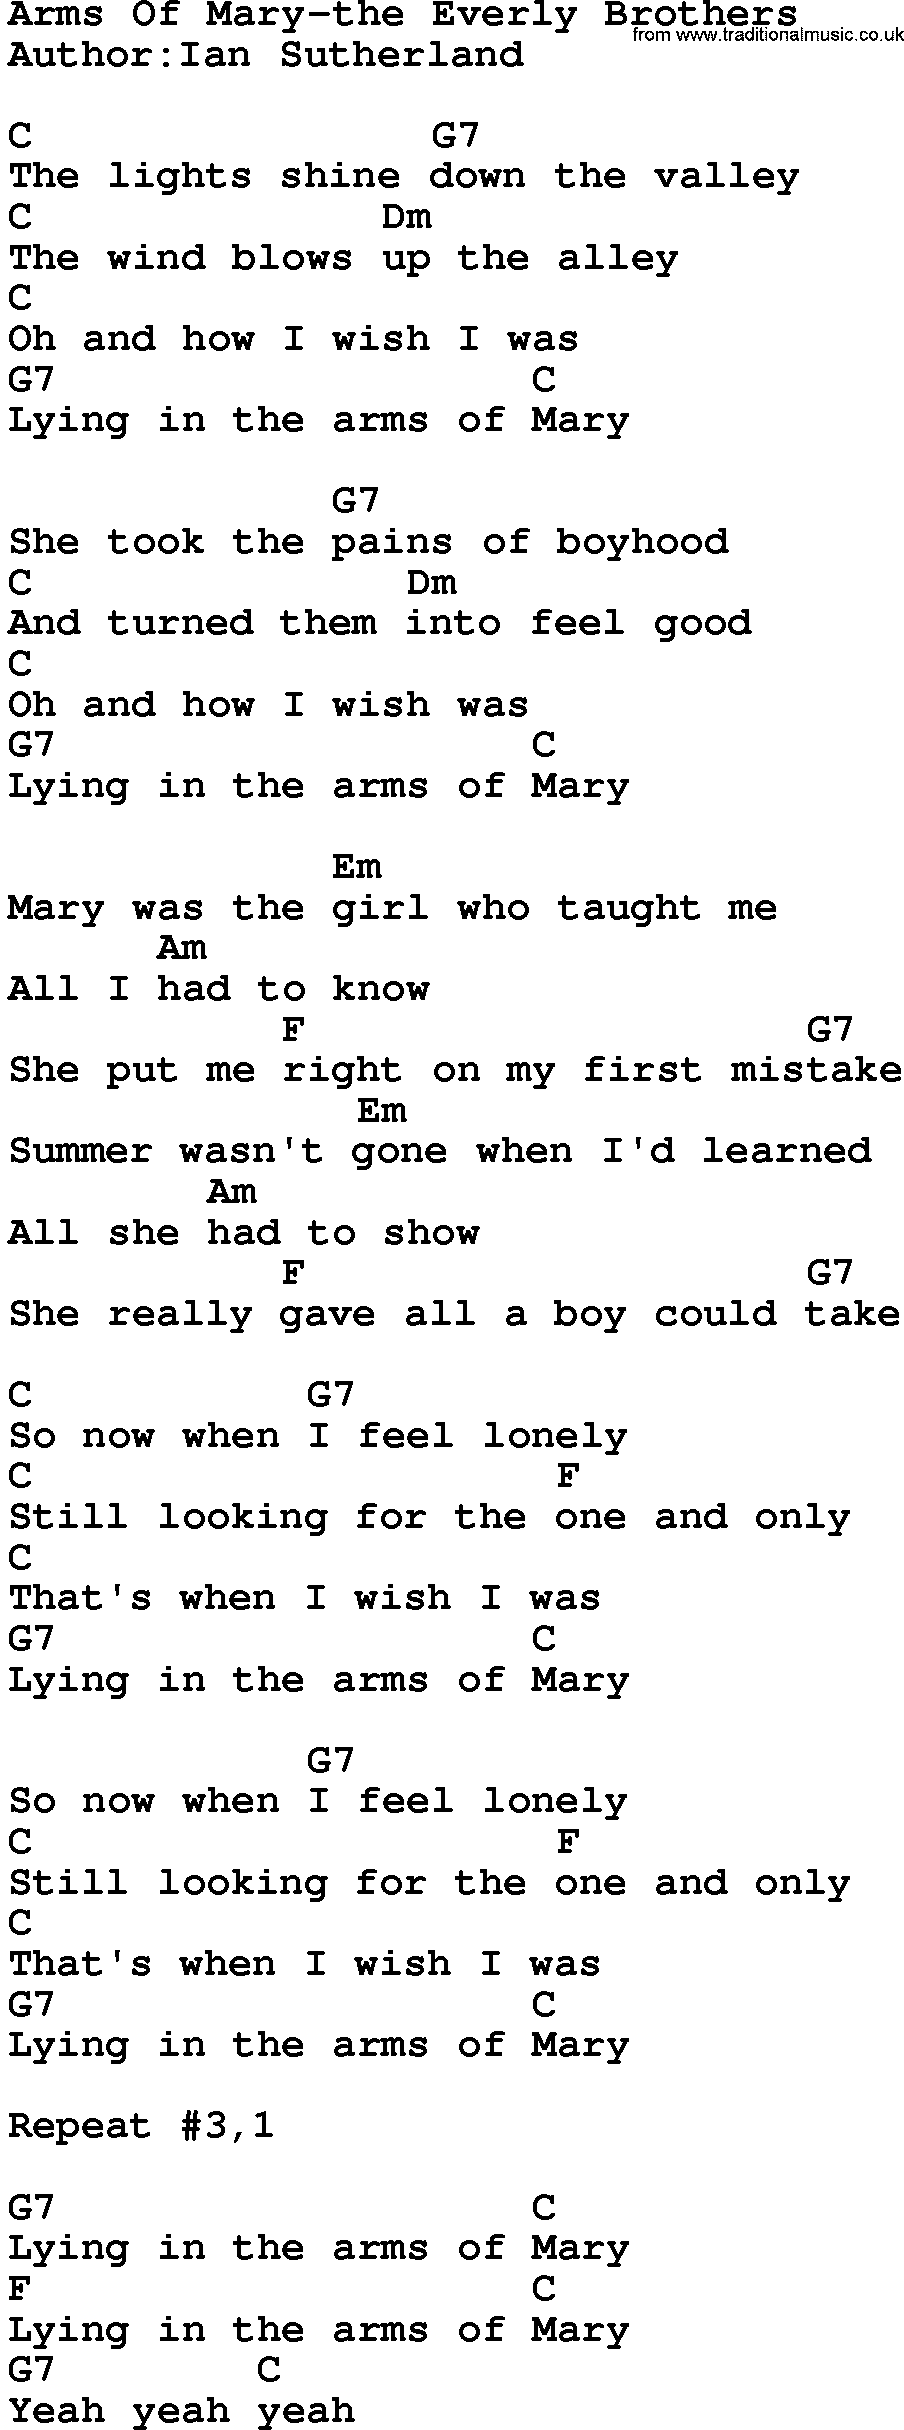 Country music song: Arms Of Mary-The Everly Brothers lyrics and chords